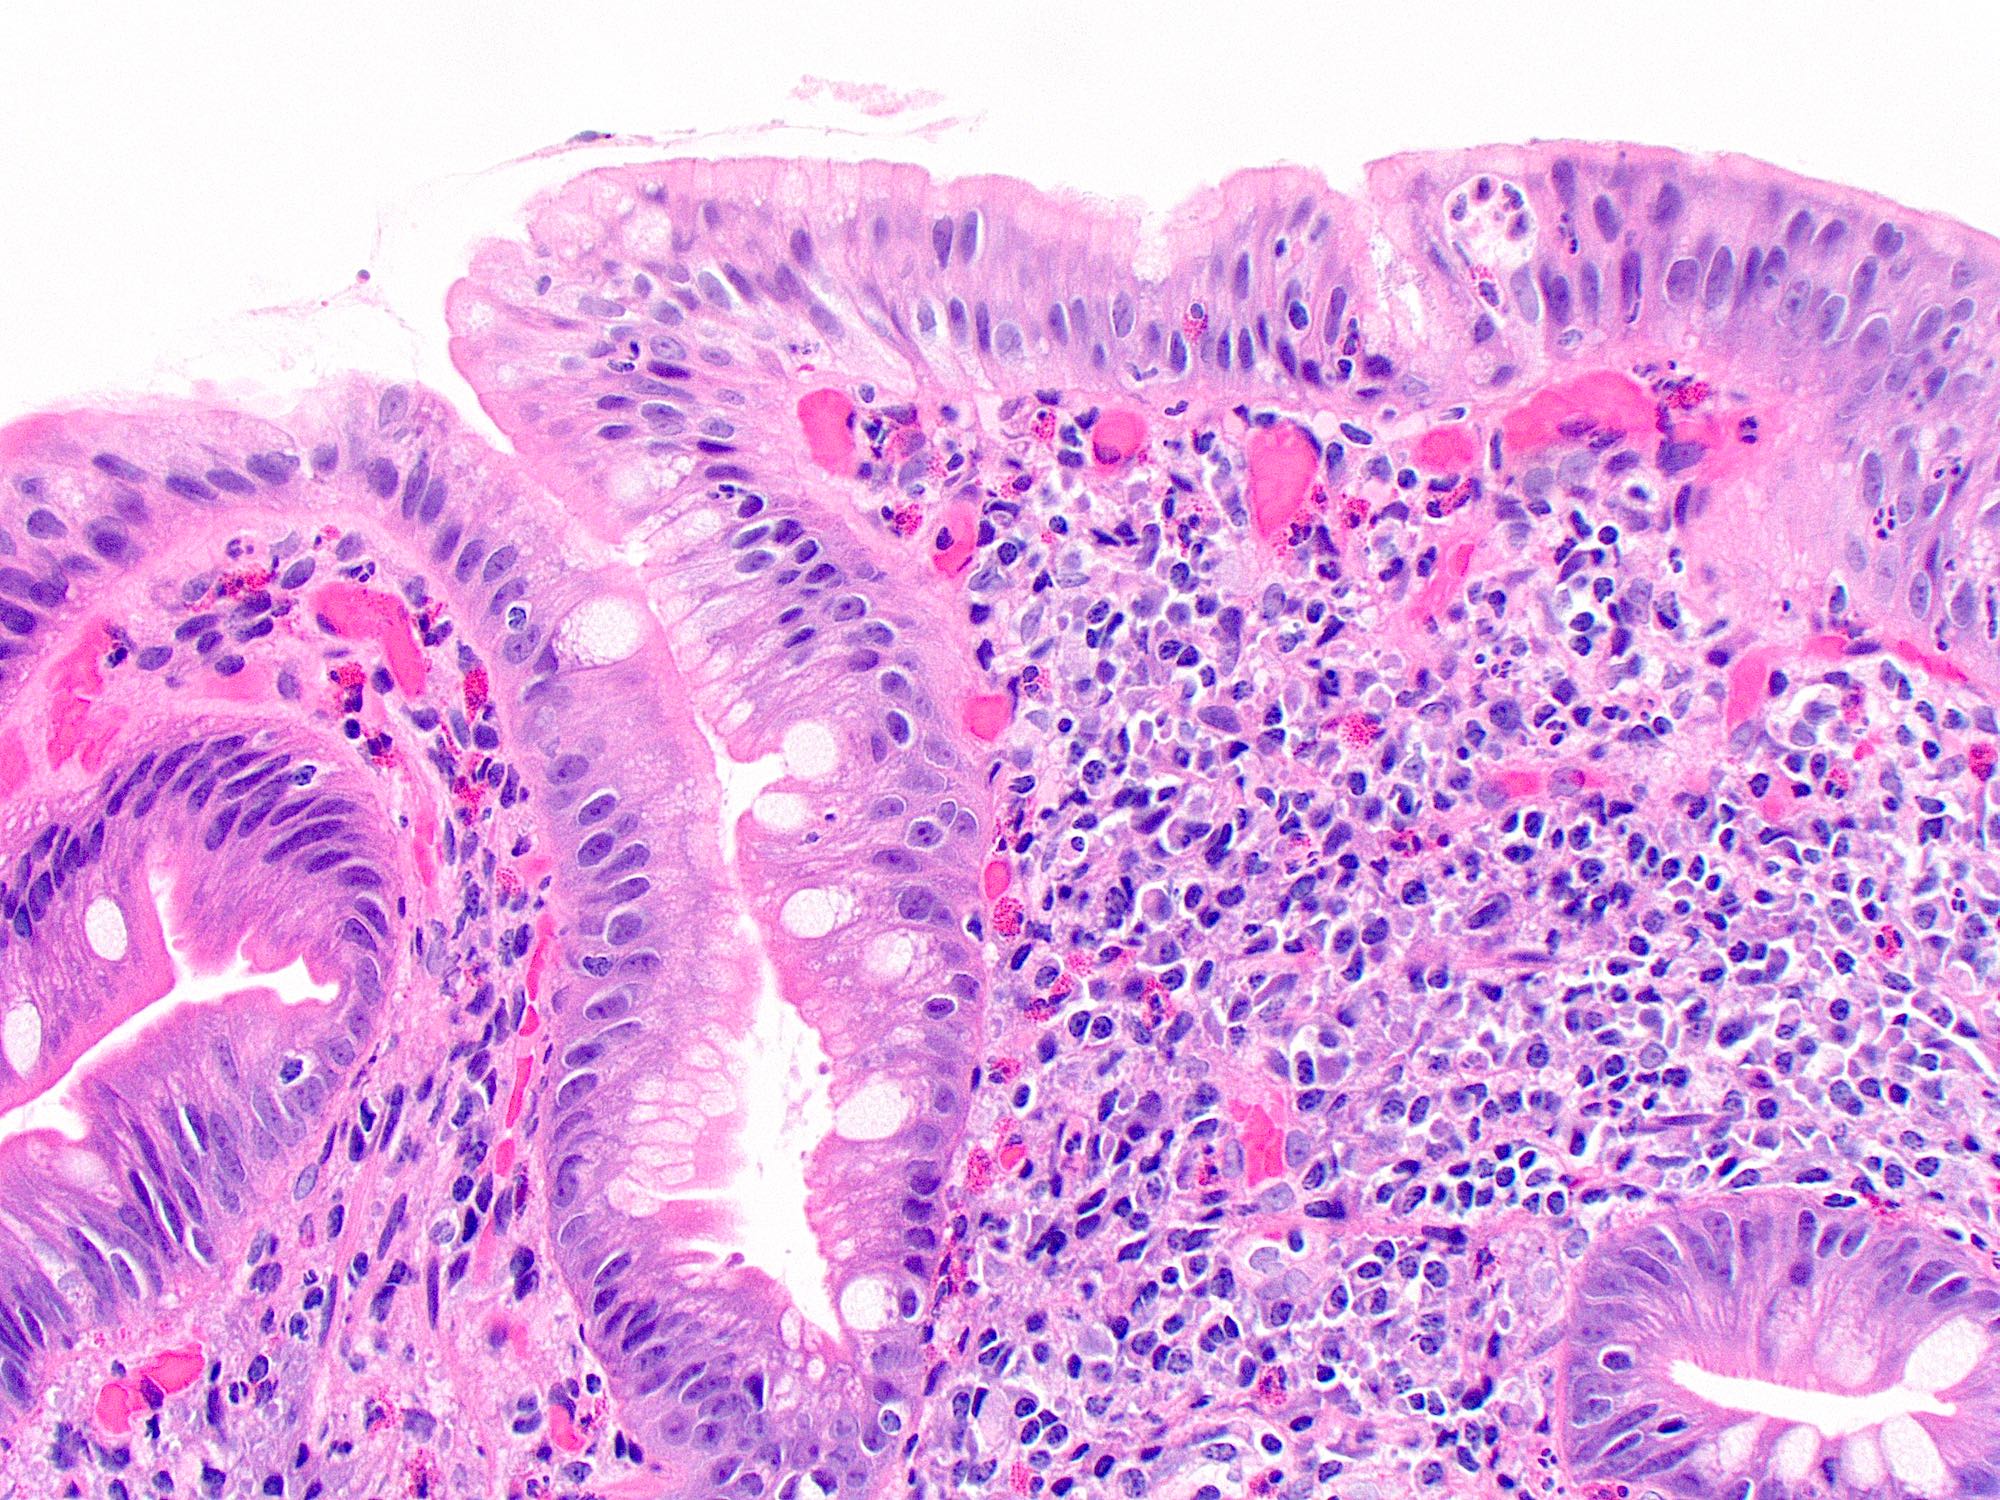 Helicobacter infection in duodenum